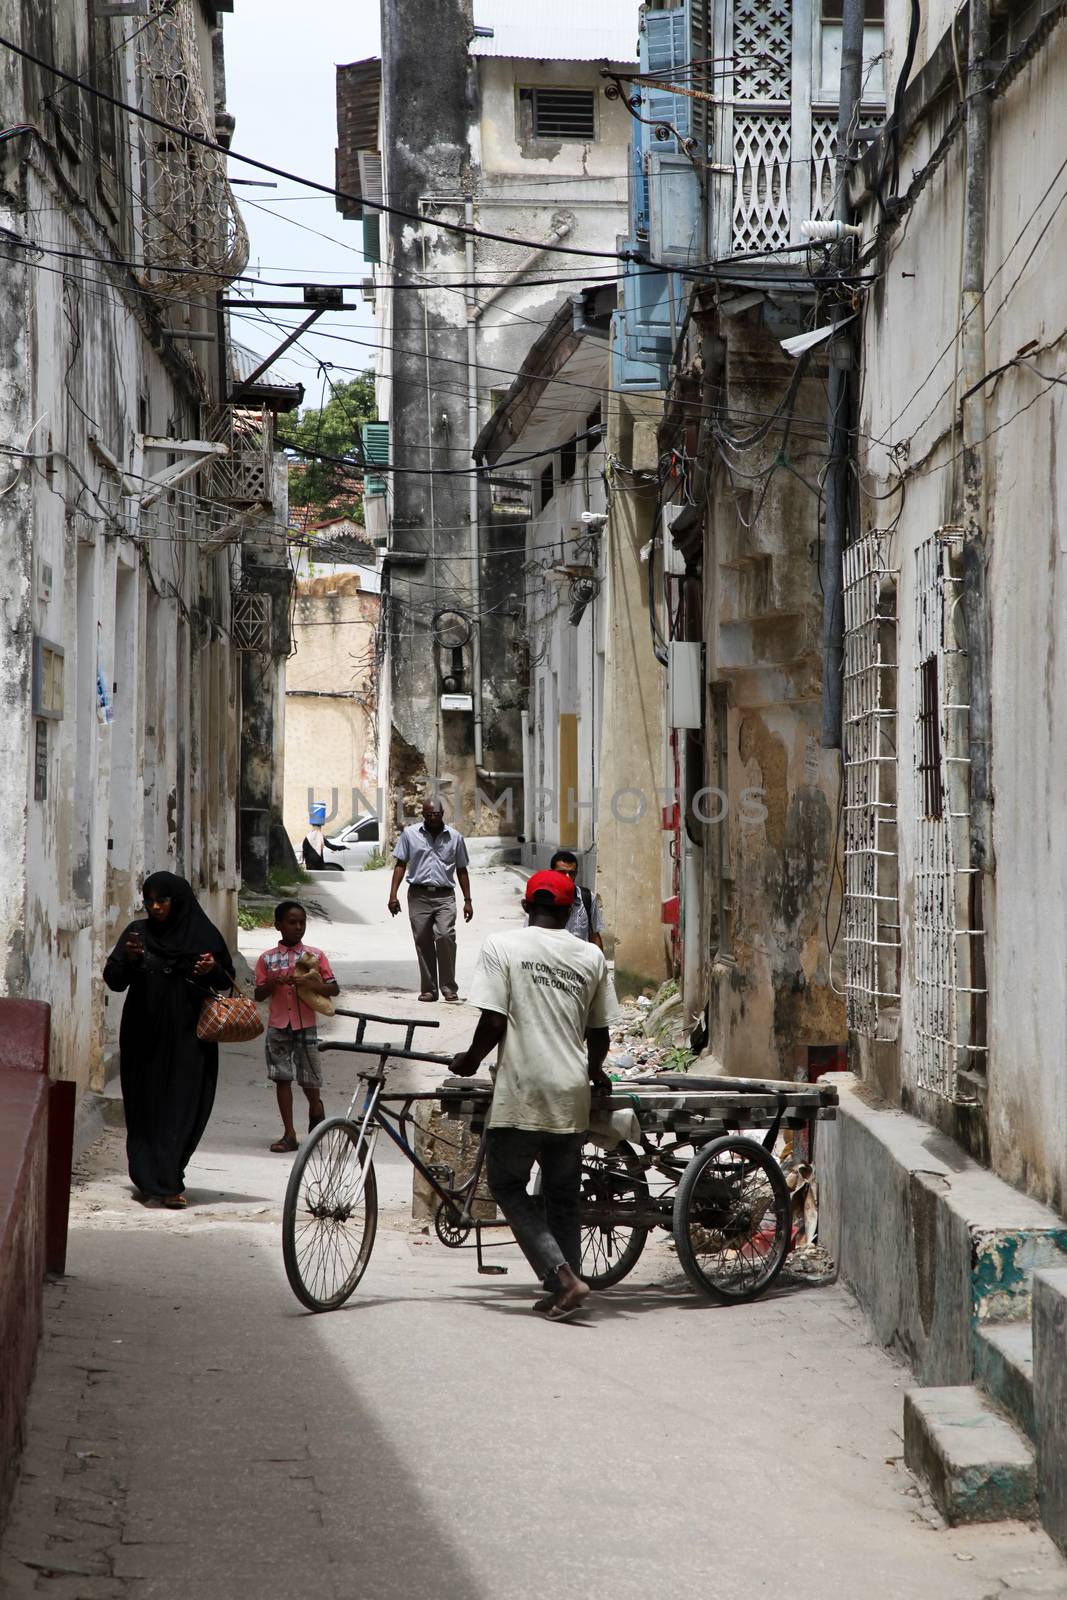 Stone town, Tanzania - December 30, 2015: Stone Town. Woman in Zanzibar all have to wear black burka when they go outside, even girls have to wear scalf on their heads. It is a Muslim life stile. Streets of the town are always lively. 